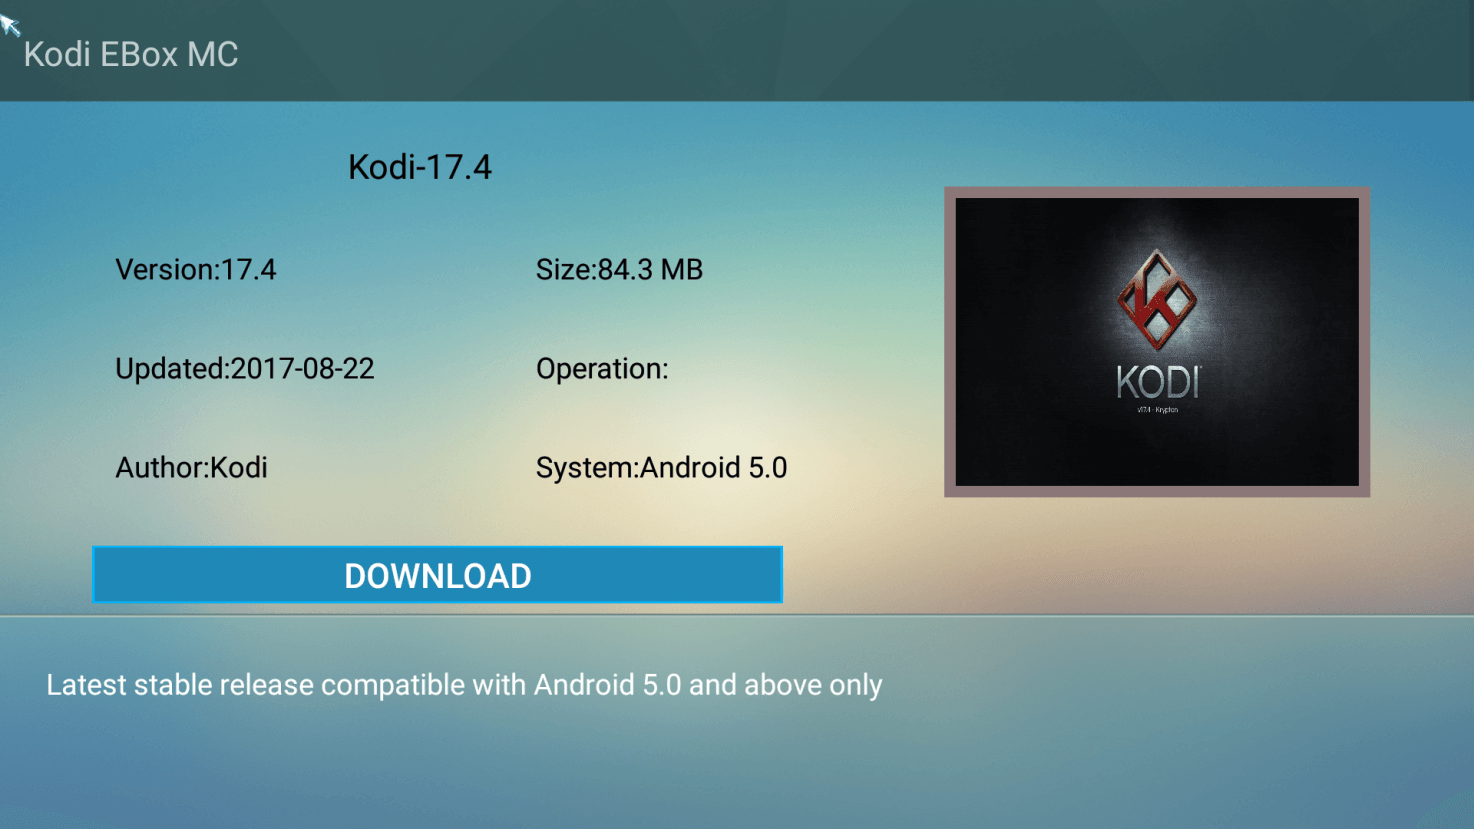 How to install kodi on android device